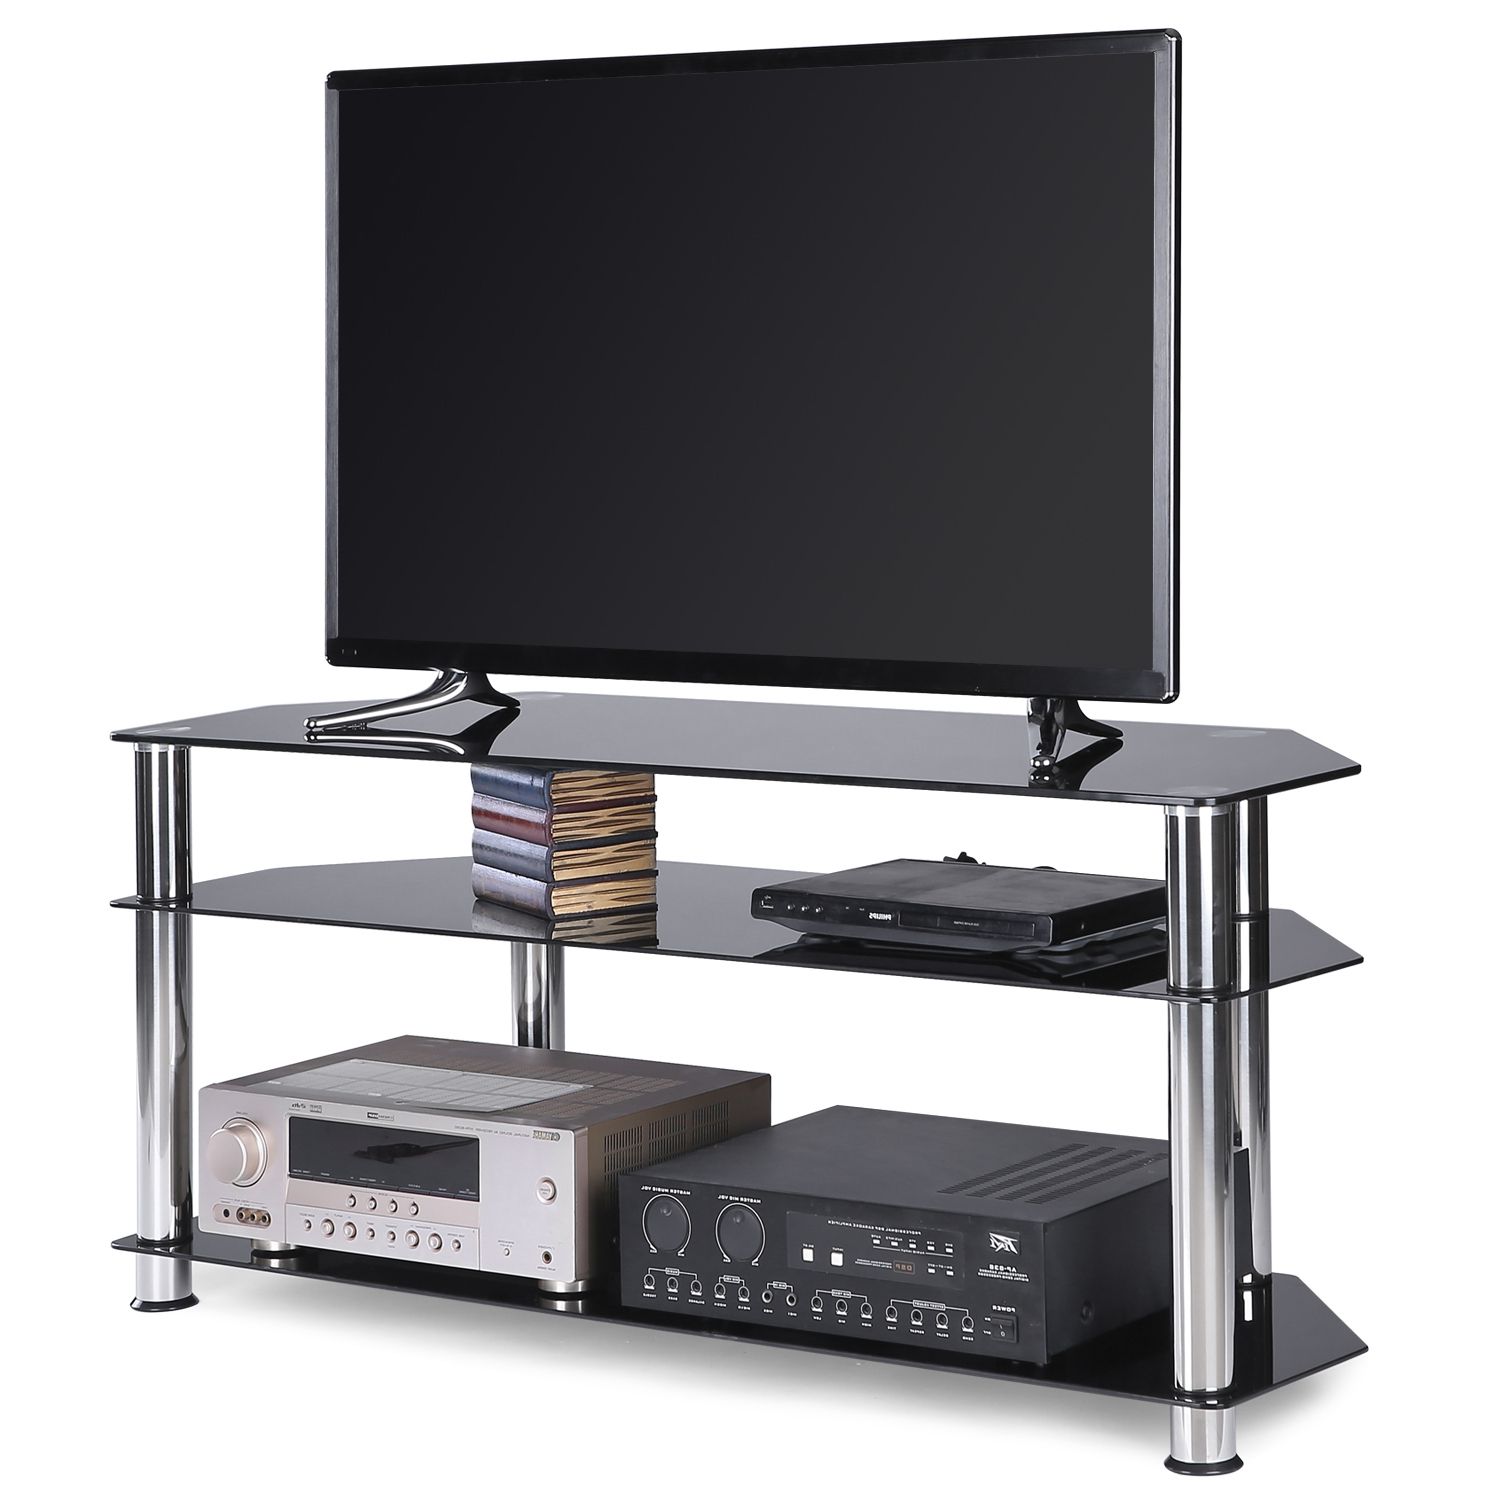 Sahika Tv Stands For Tvs Up To 55" Intended For Preferred Contemporary Black Corner Glass Tv Stand For Tvs Up To 55 (Photo 5 of 25)